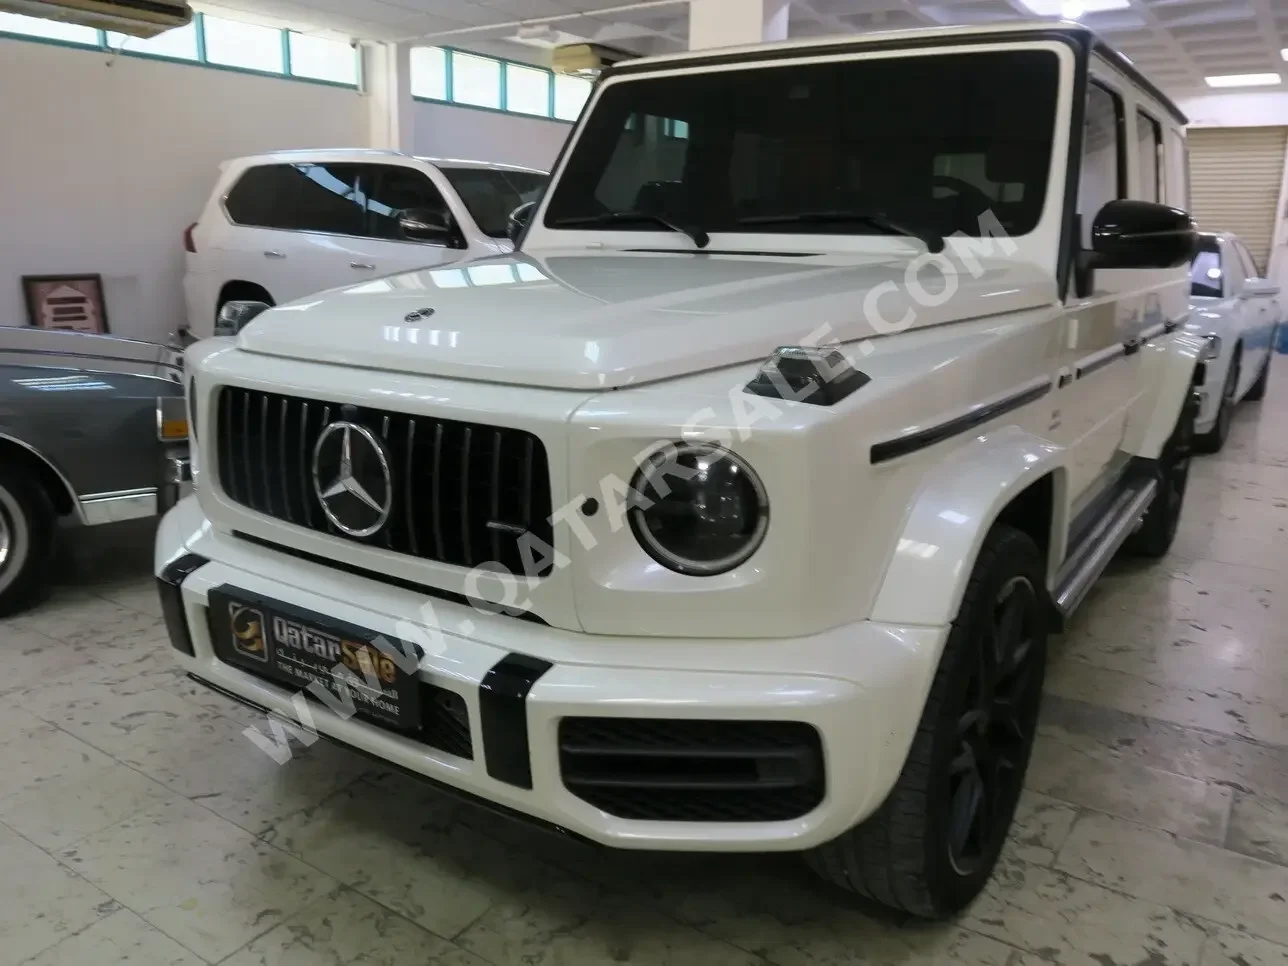 Mercedes-Benz  G-Class  63 AMG Edition 1  2019  Automatic  20,000 Km  8 Cylinder  Four Wheel Drive (4WD)  SUV  White  With Warranty